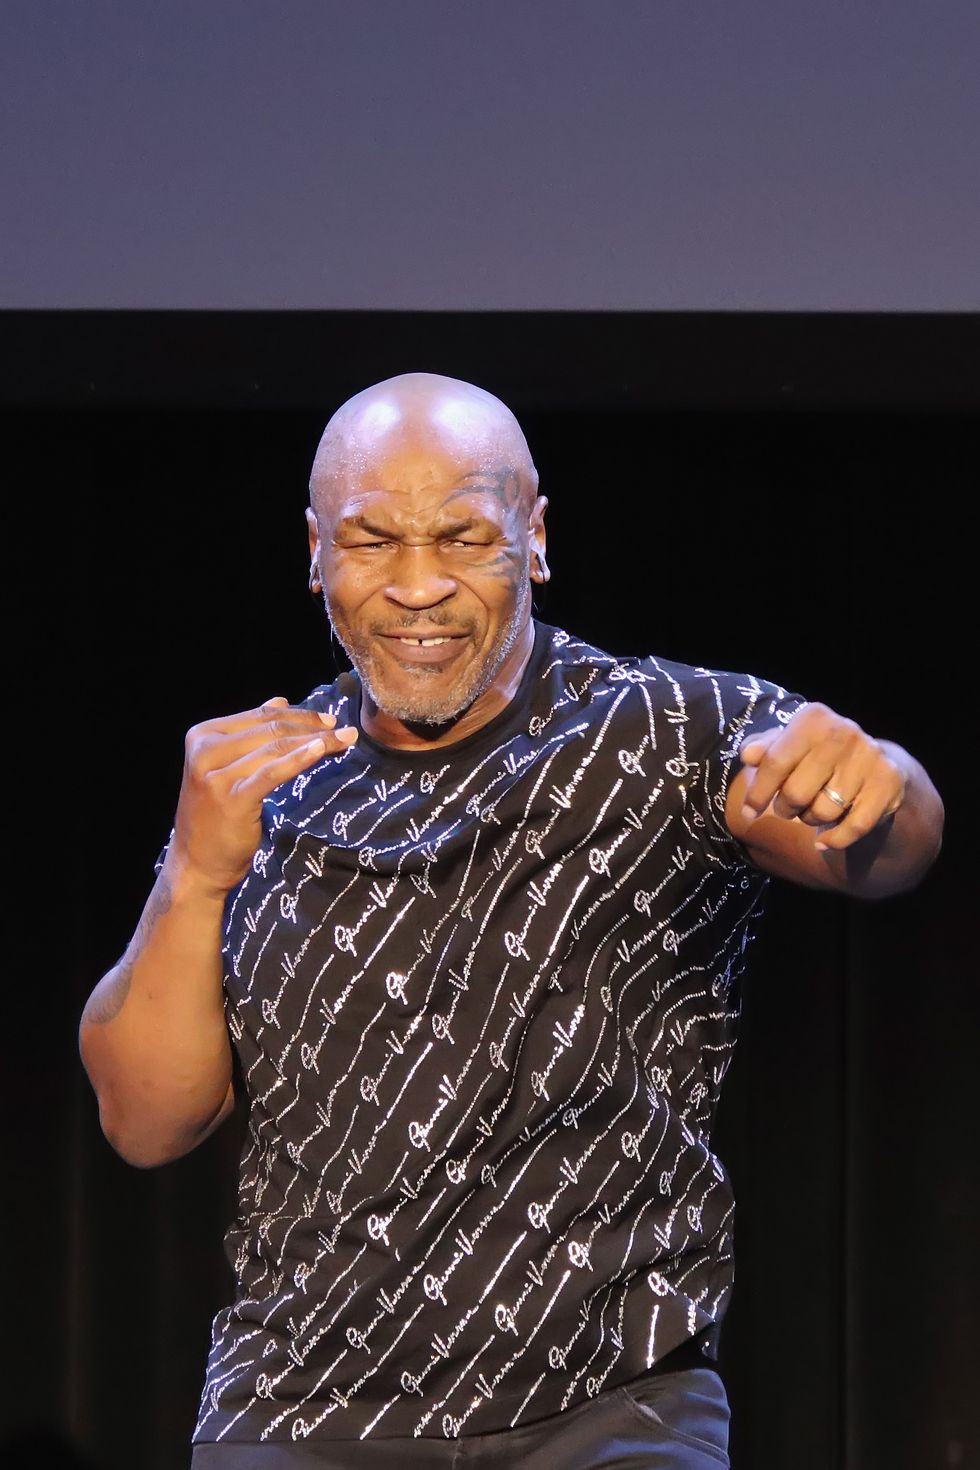 Mike Tyson Launches Sports League for ‘Legends’, Announces First Opponent